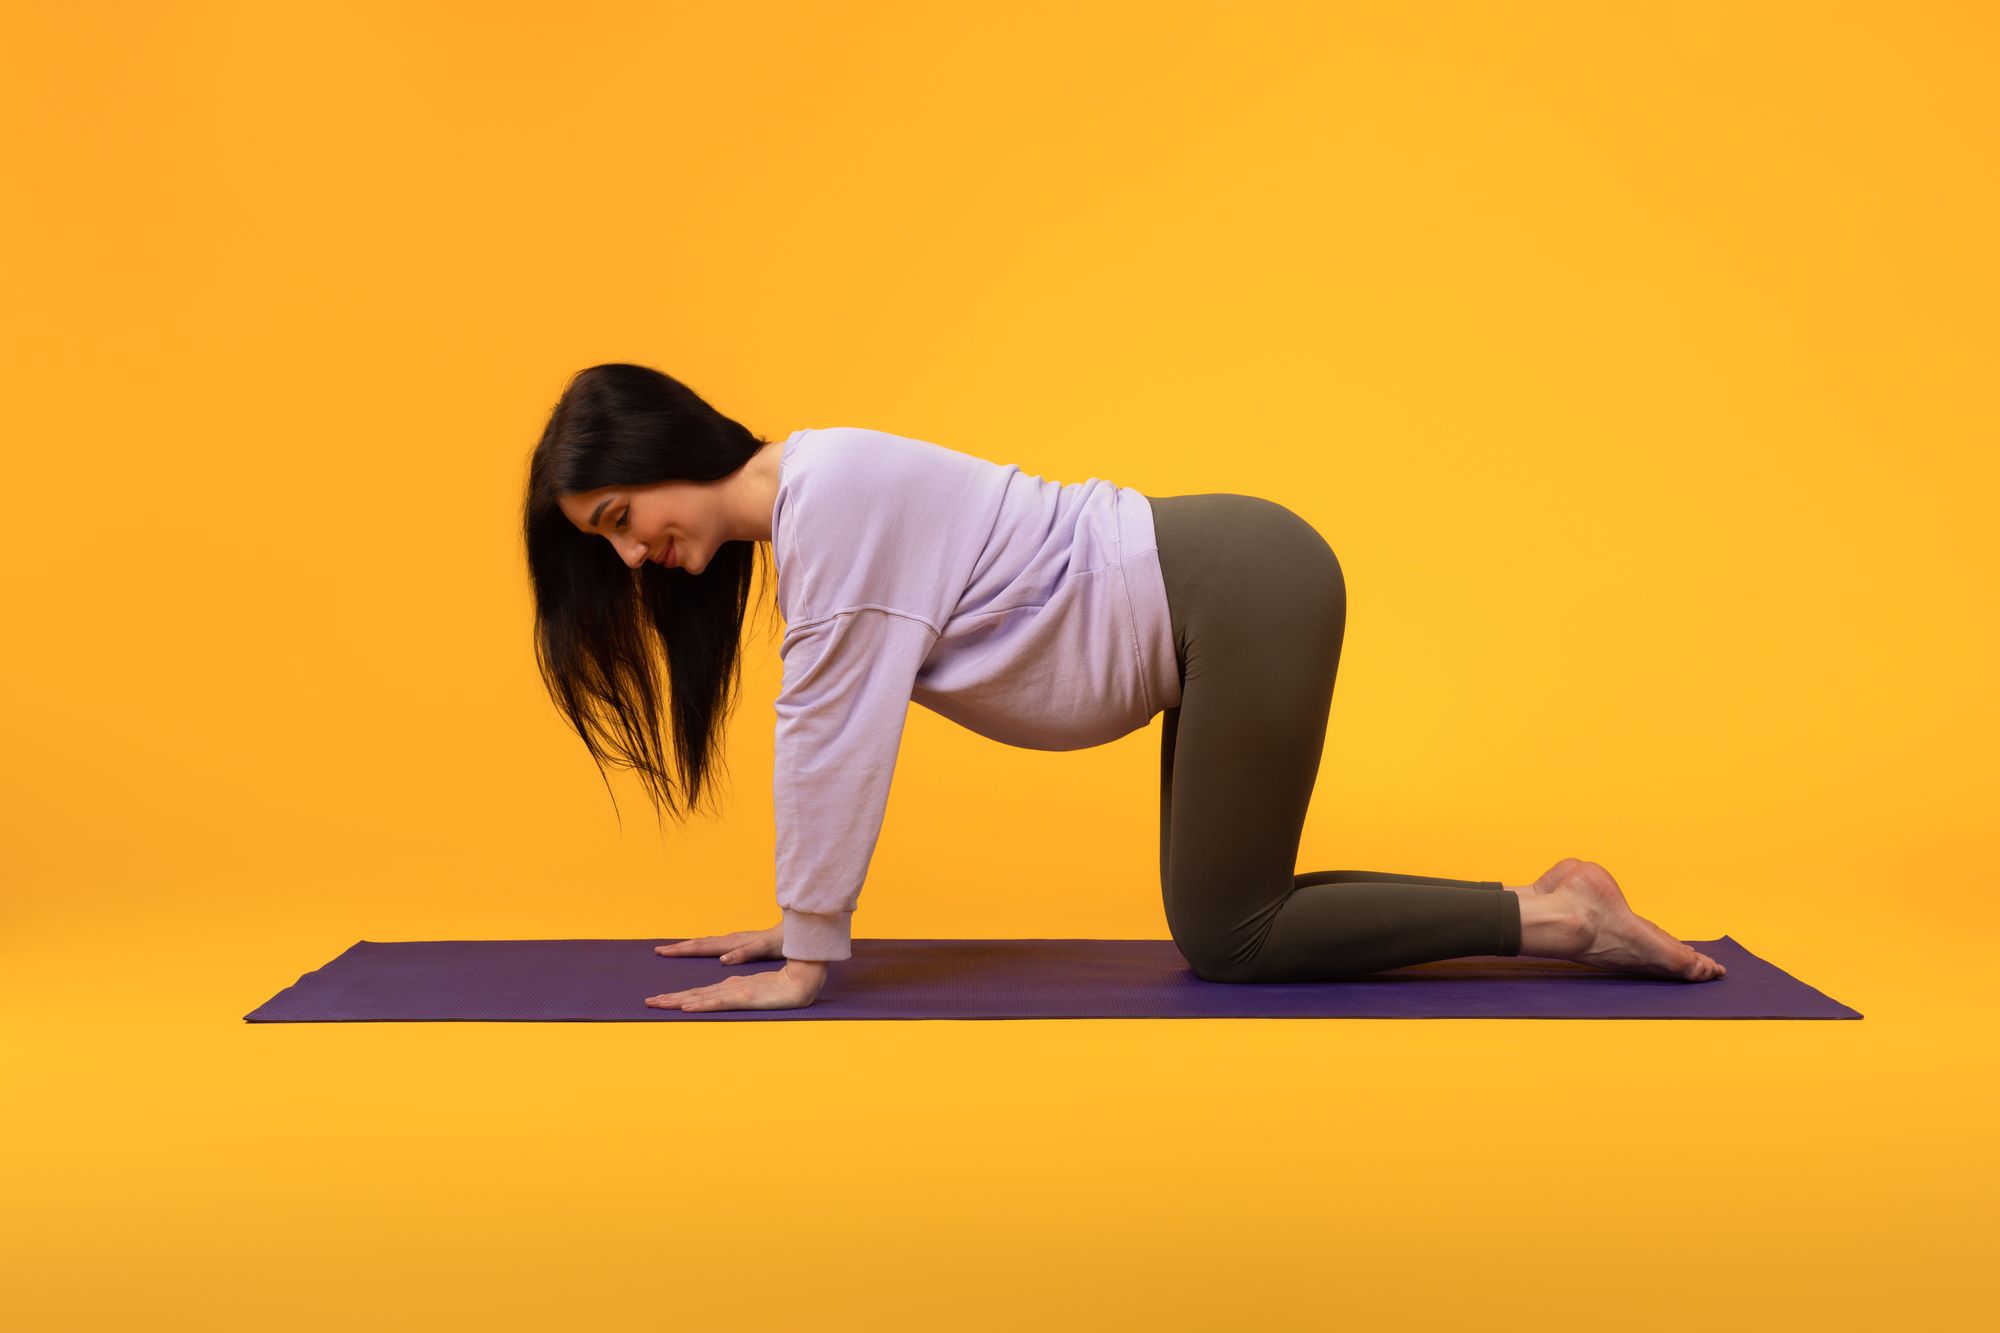 e view of young pregnant lady exercising on yoga mat, expectant woman in activewear practicing sports on yellow background